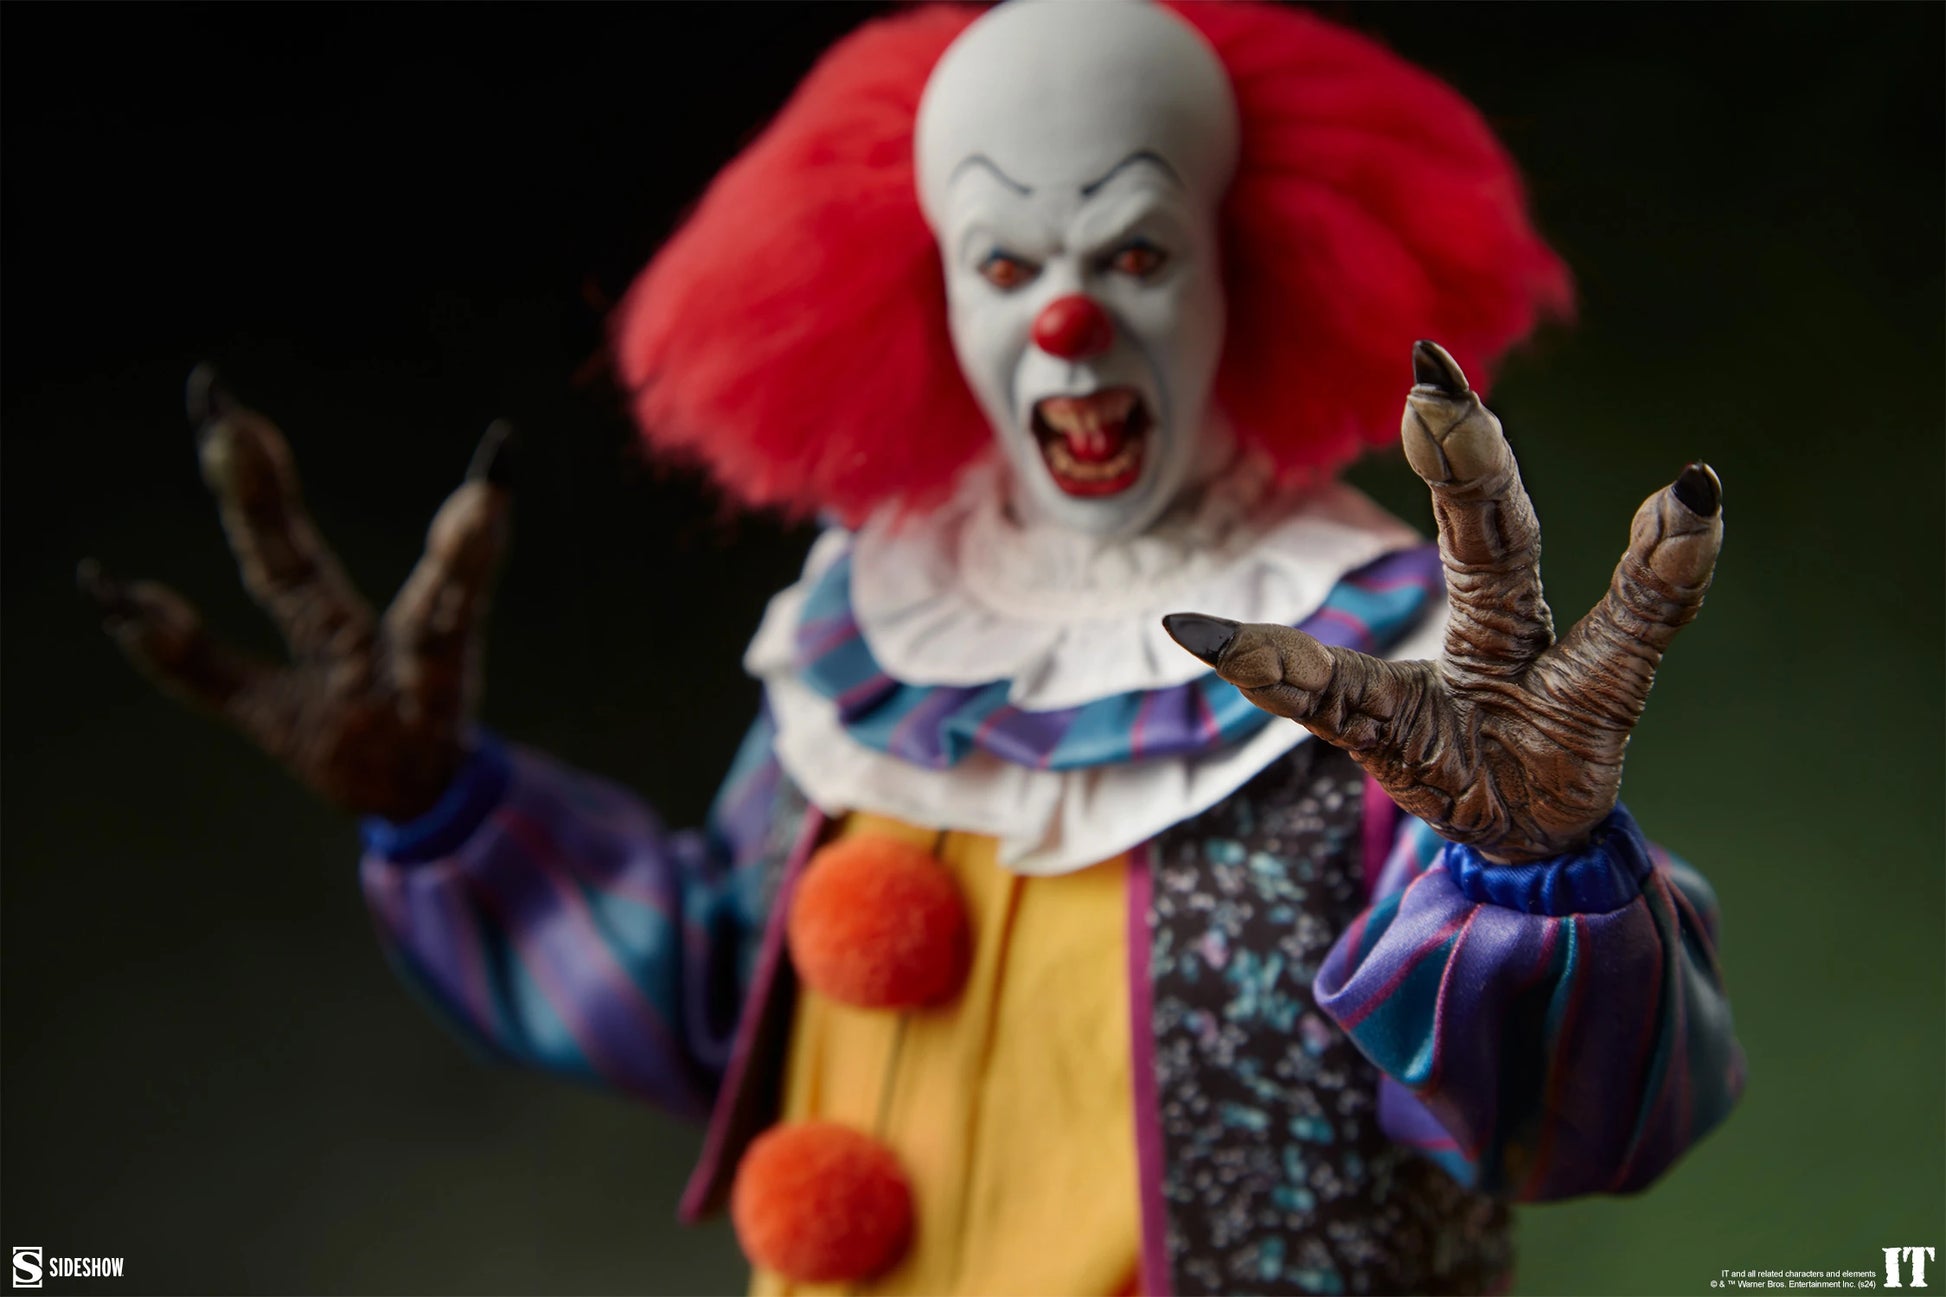 SIDESHOW PENNYWISE SIXTH SCALE FIGURE (PRE-ORDER) - Anotoys Collectibles